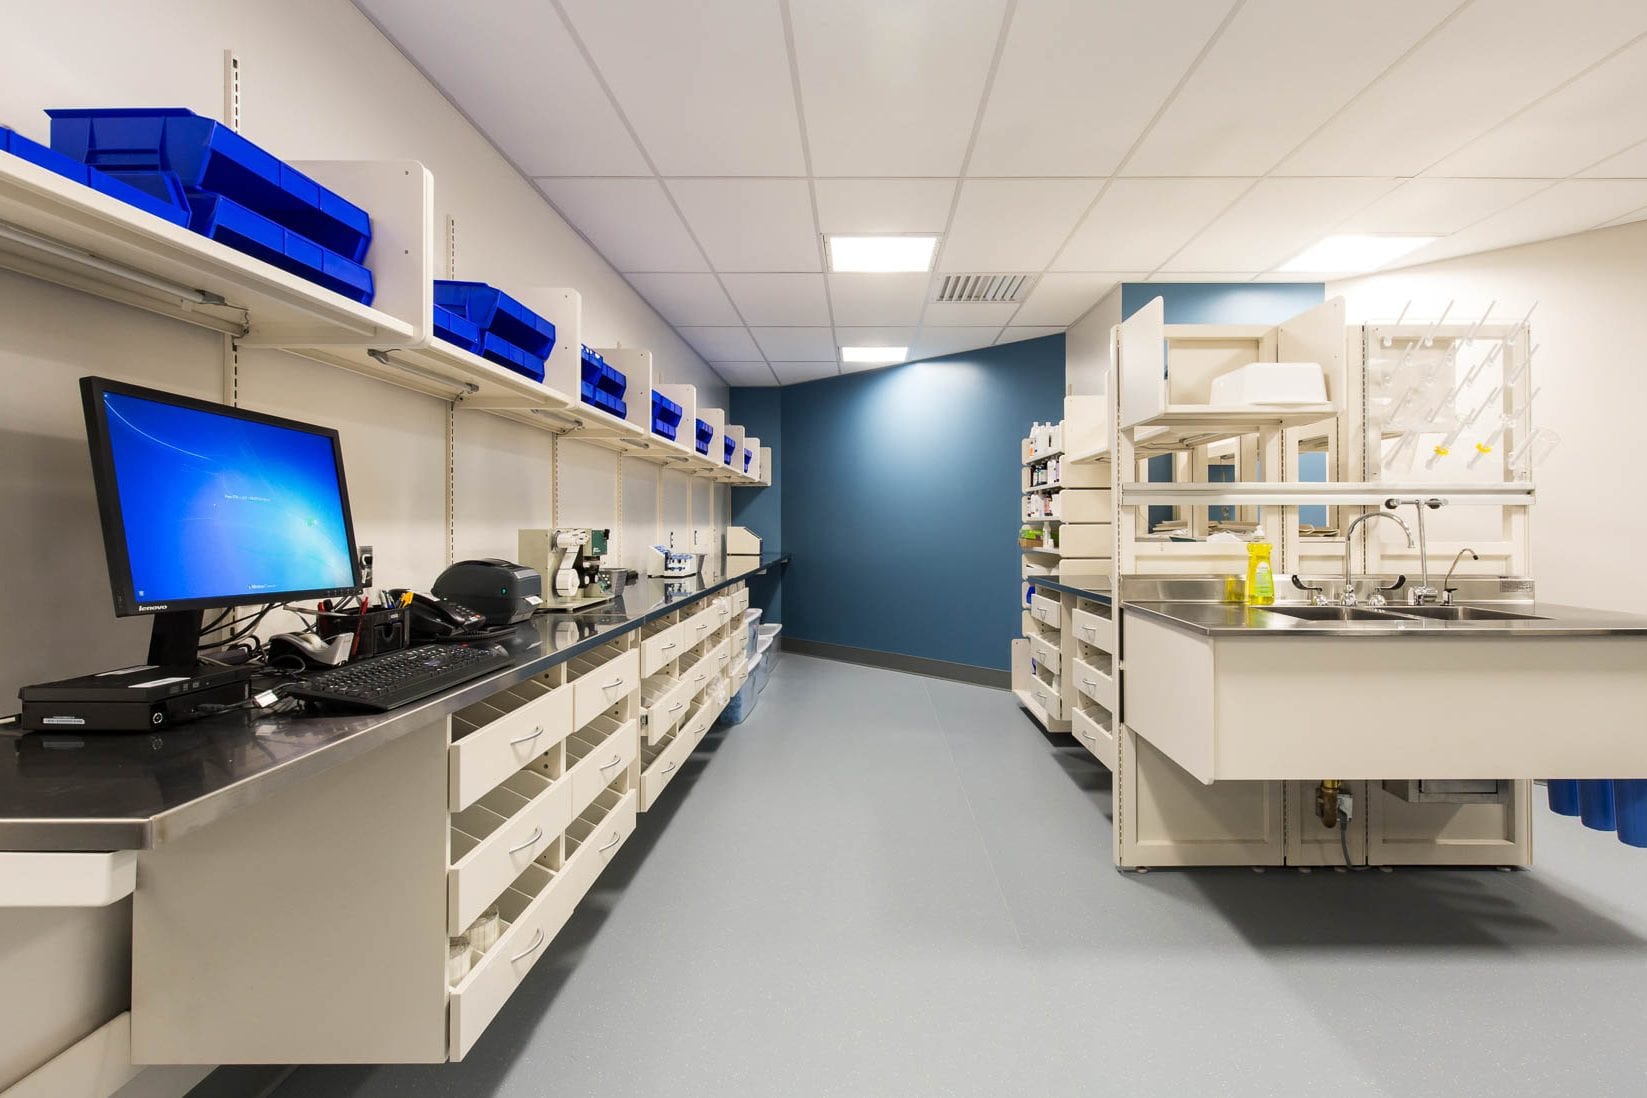 CDC upgraded the regional production and pharmacy facility at VGH